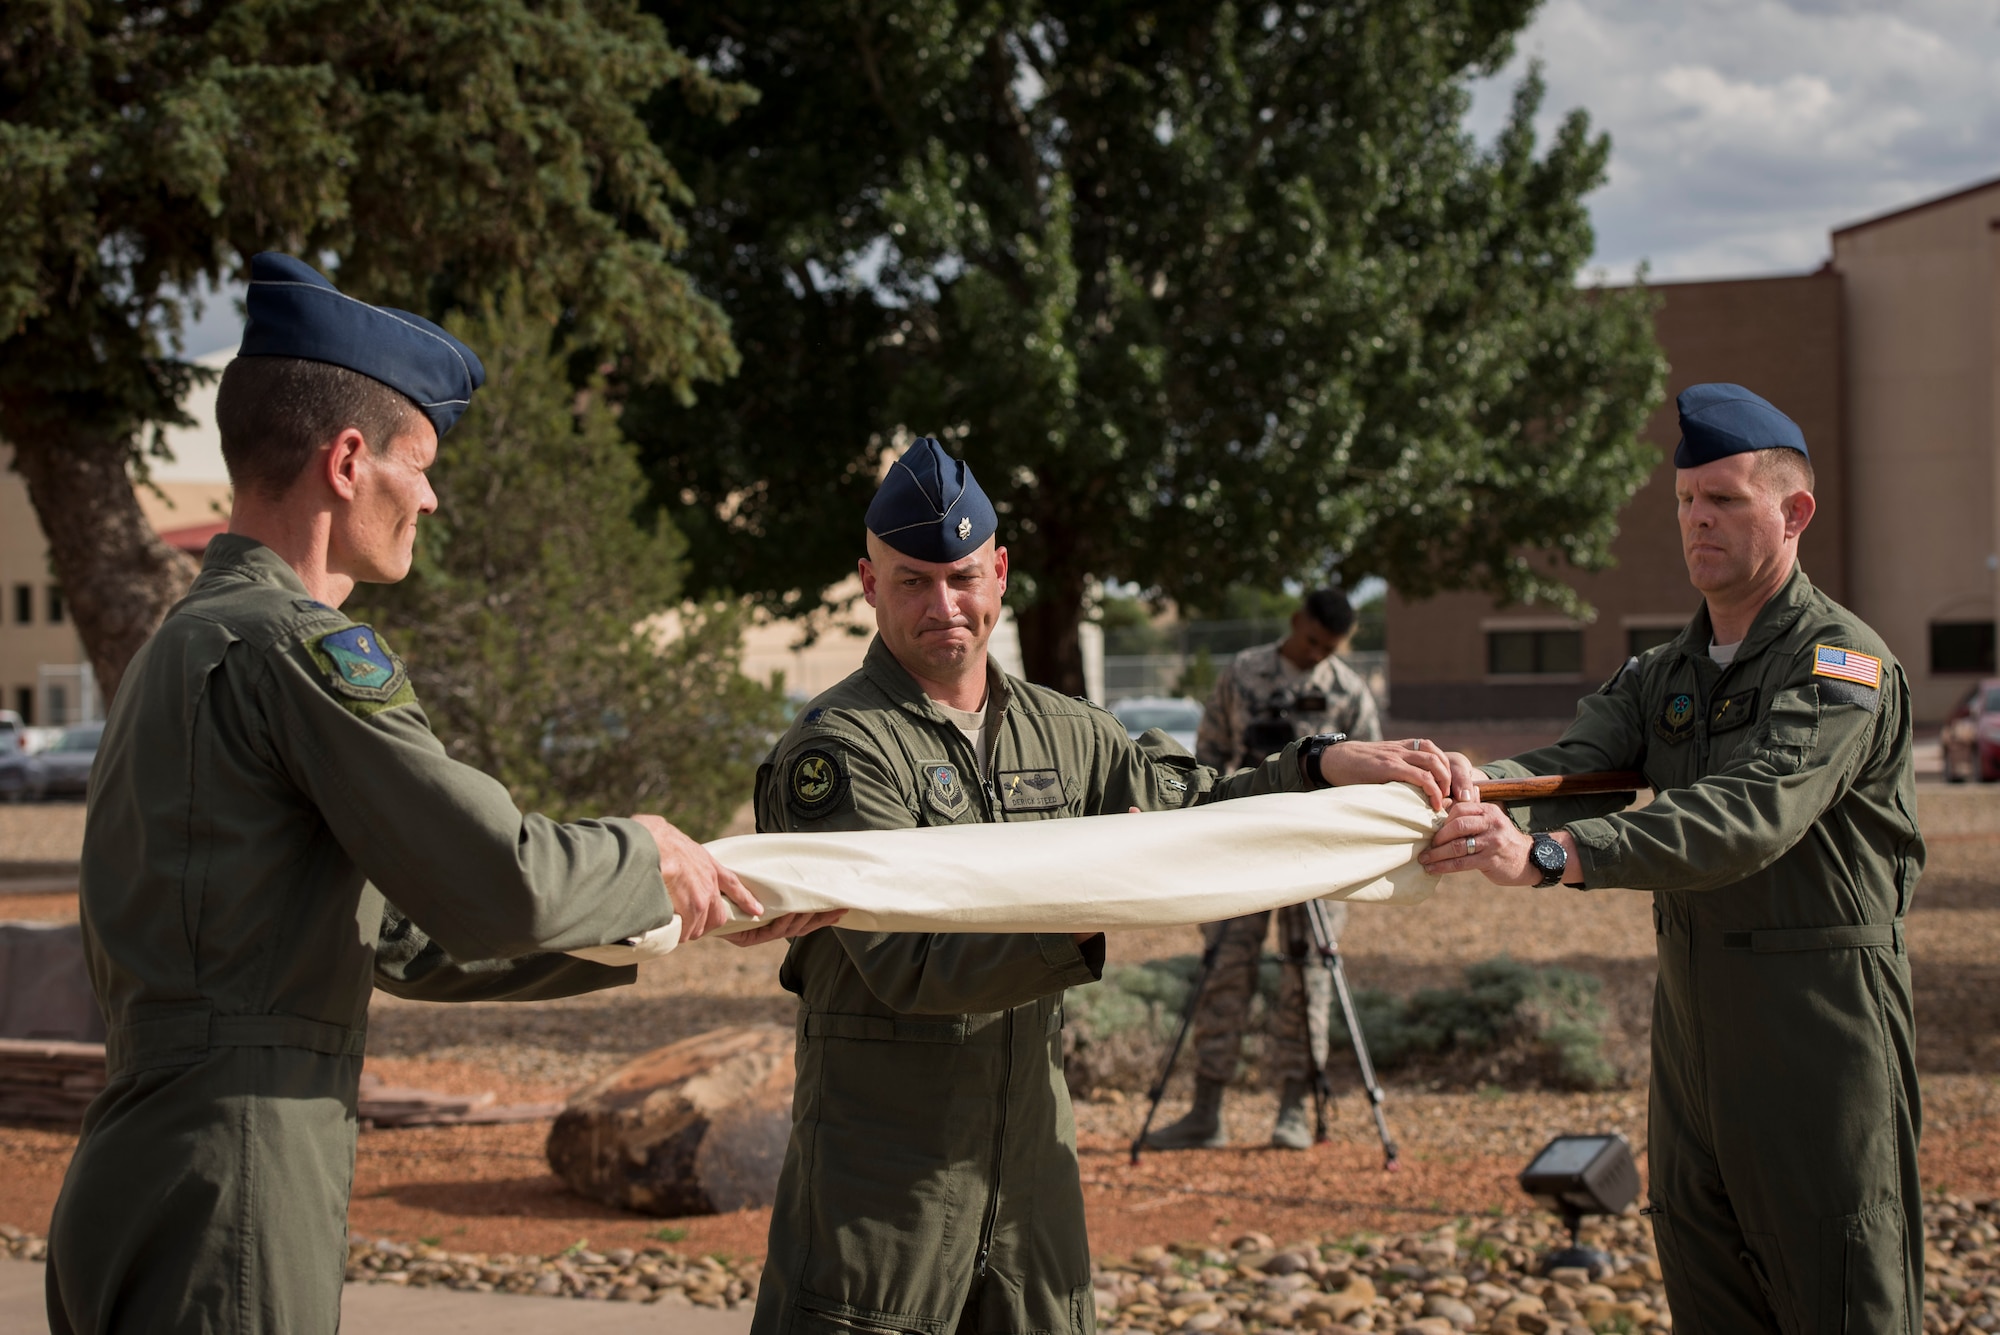 (Left) Col. Benjamin Maitre, 524th Special Operations Wing commander, (middle) Lt. Col. Derick Steed, 524th Special Operations Squadron commander, and Master Sgt. Chad Beach, 524 SOS first sergeant, ceremoniously cover the guidon during the 524 SOS end of mission ceremony at Cannon Air Force Base, N.M., May 31, 2017. The 524th is relocating to Duke Field, Florida, where the command will change hands from the 27th SOW to the 492nd SOW. The squadron has ties back to WWII, before it received its numerical designation of 524. (U.S. Air Force photo by Staff Sgt. Michael Washburn/Released)